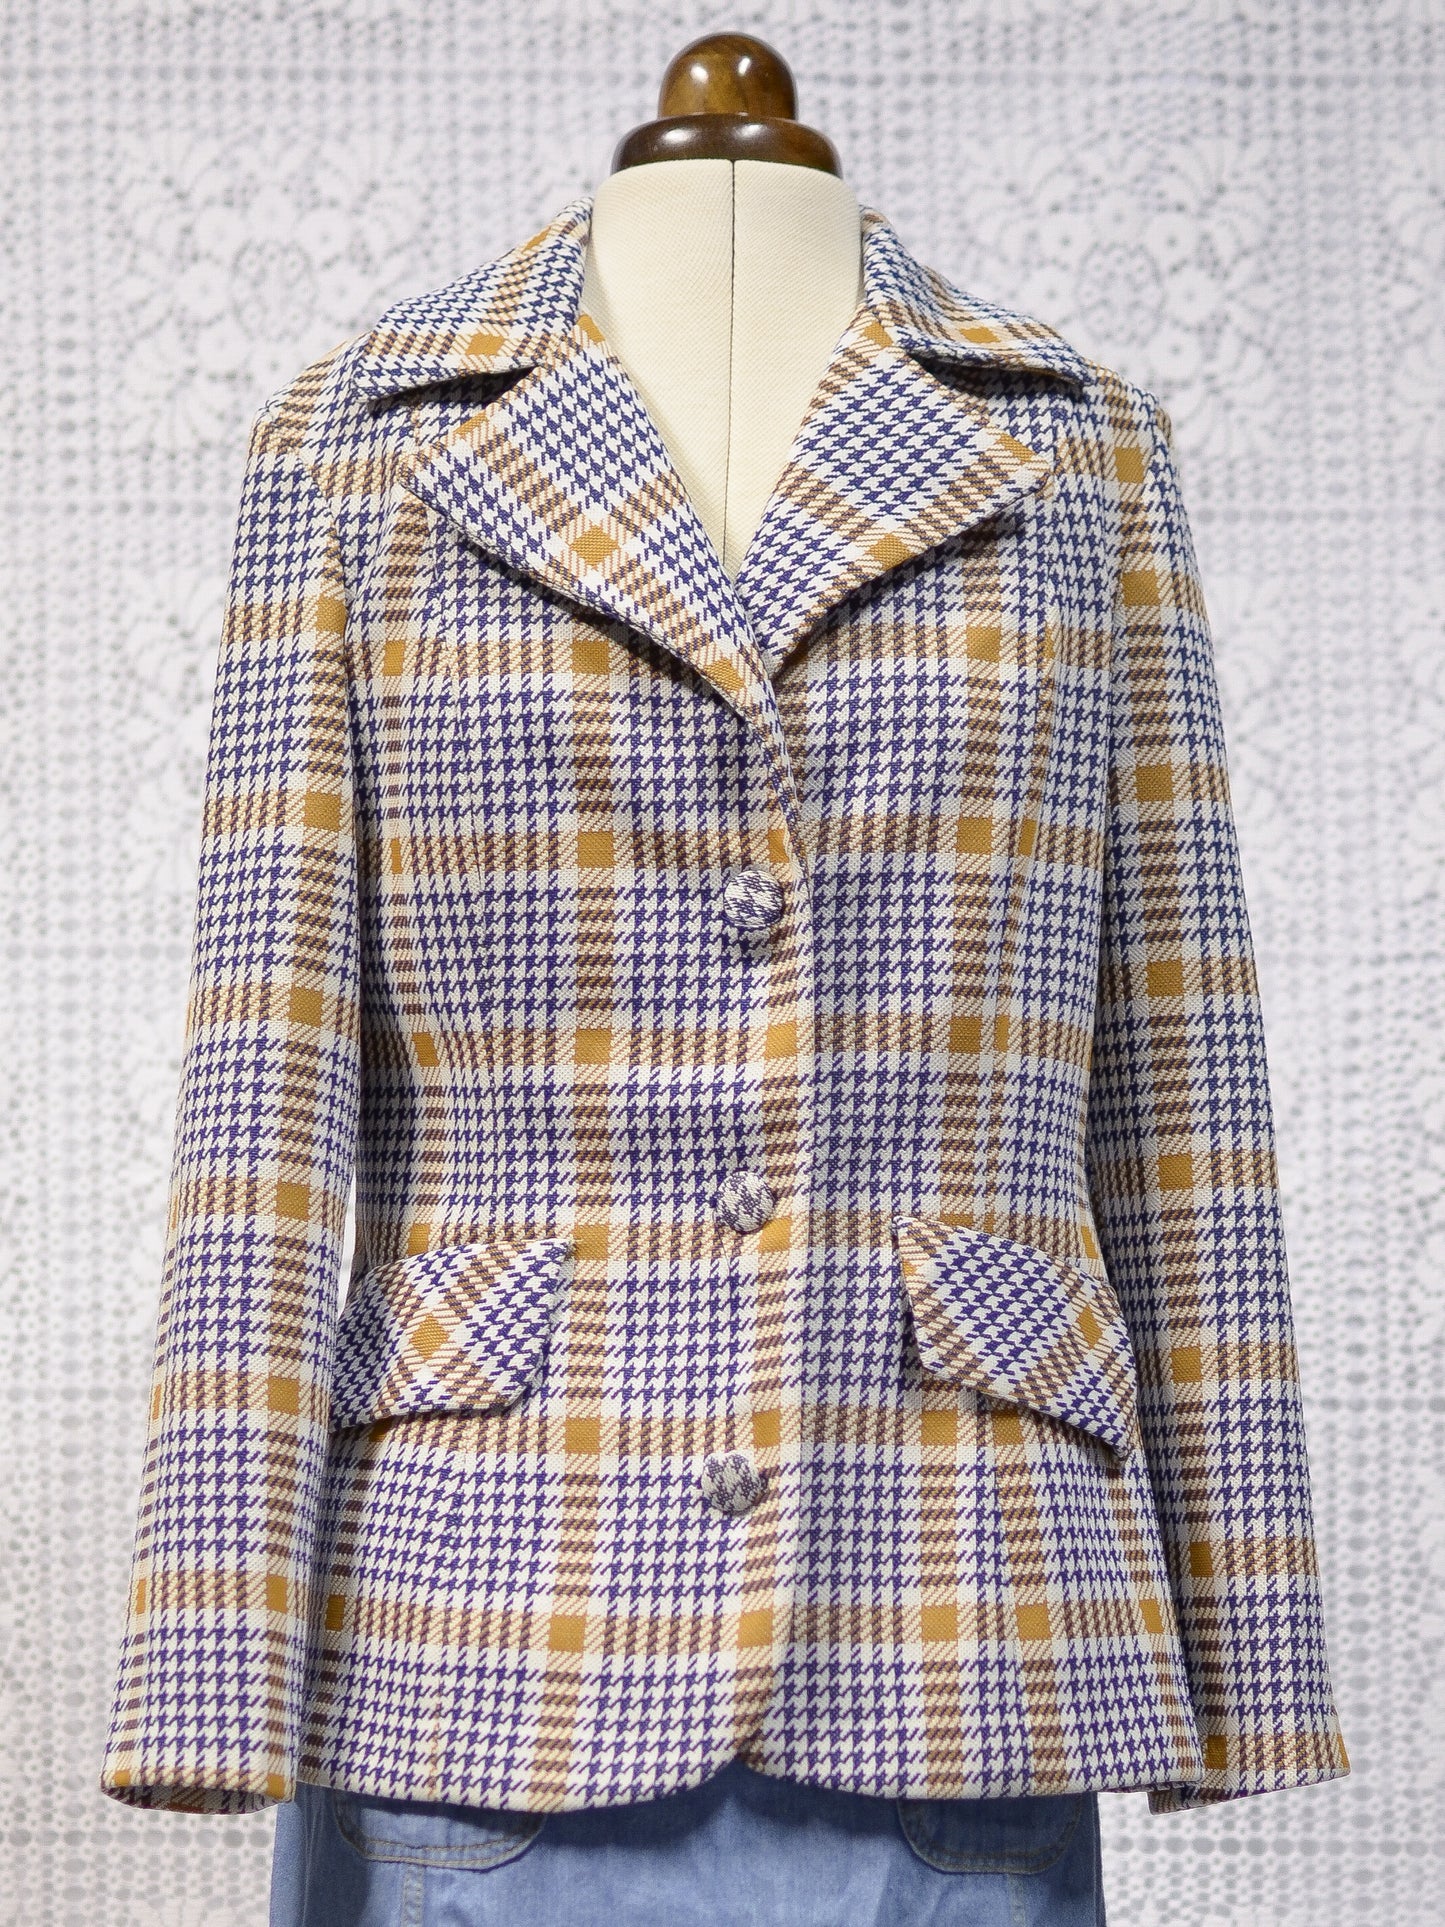 1970s brown and blue check long sleeve jacket